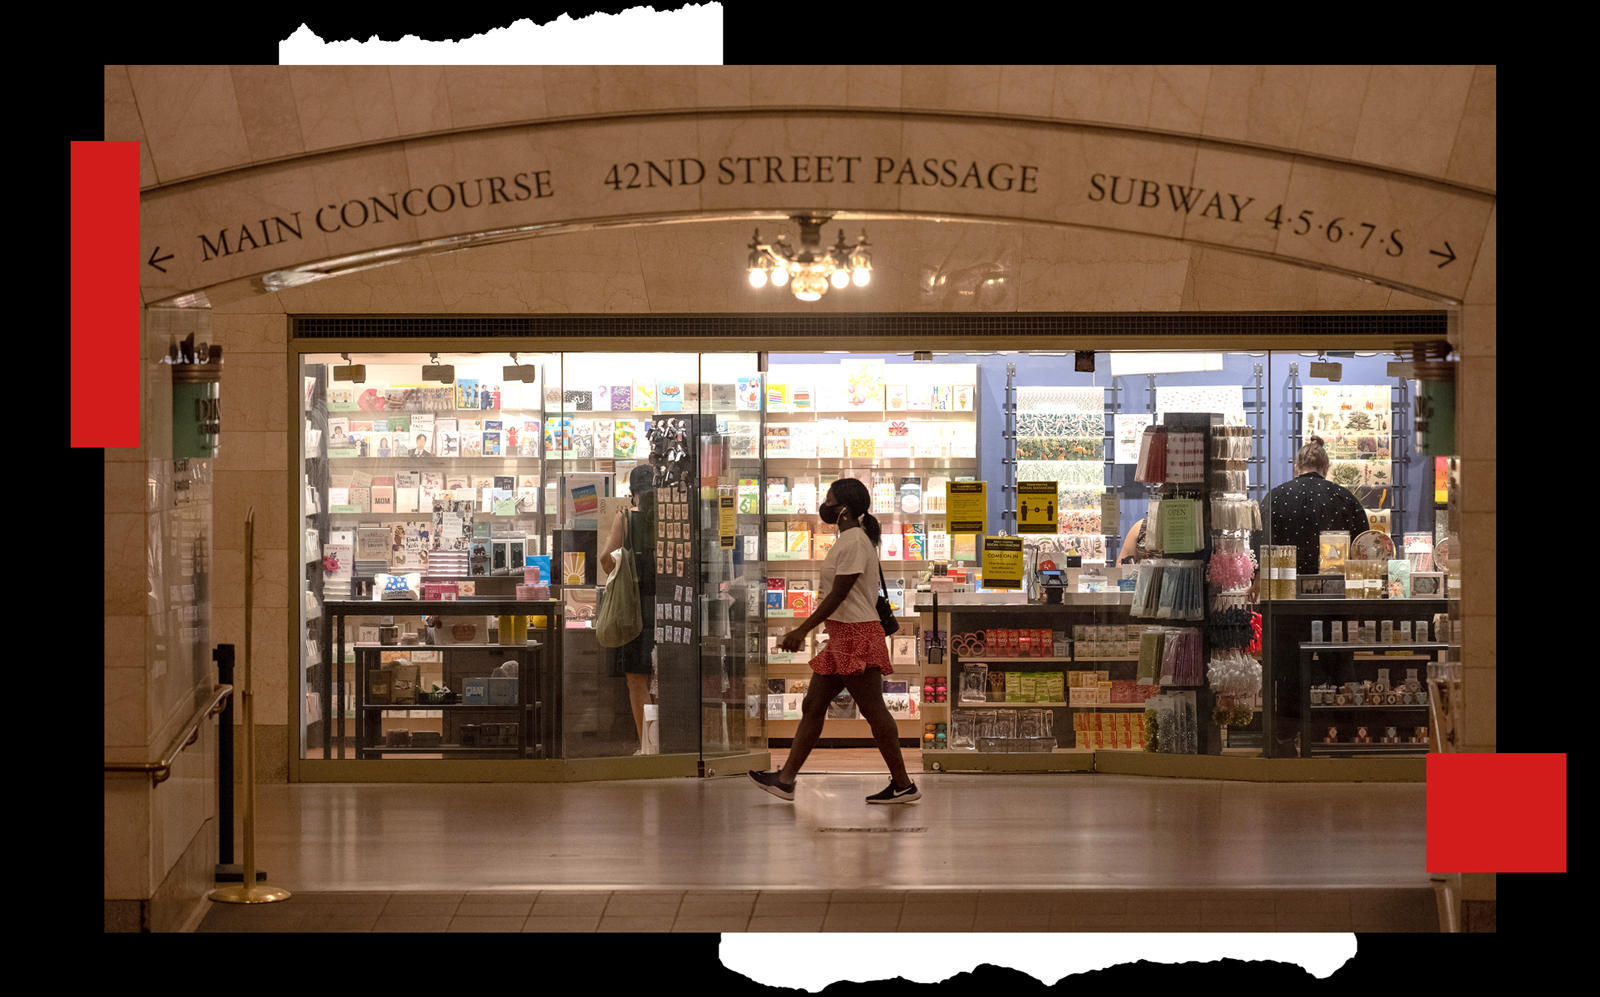 The MTA board approved rent relief for small businesses in Grand Central and other locations (iStock)